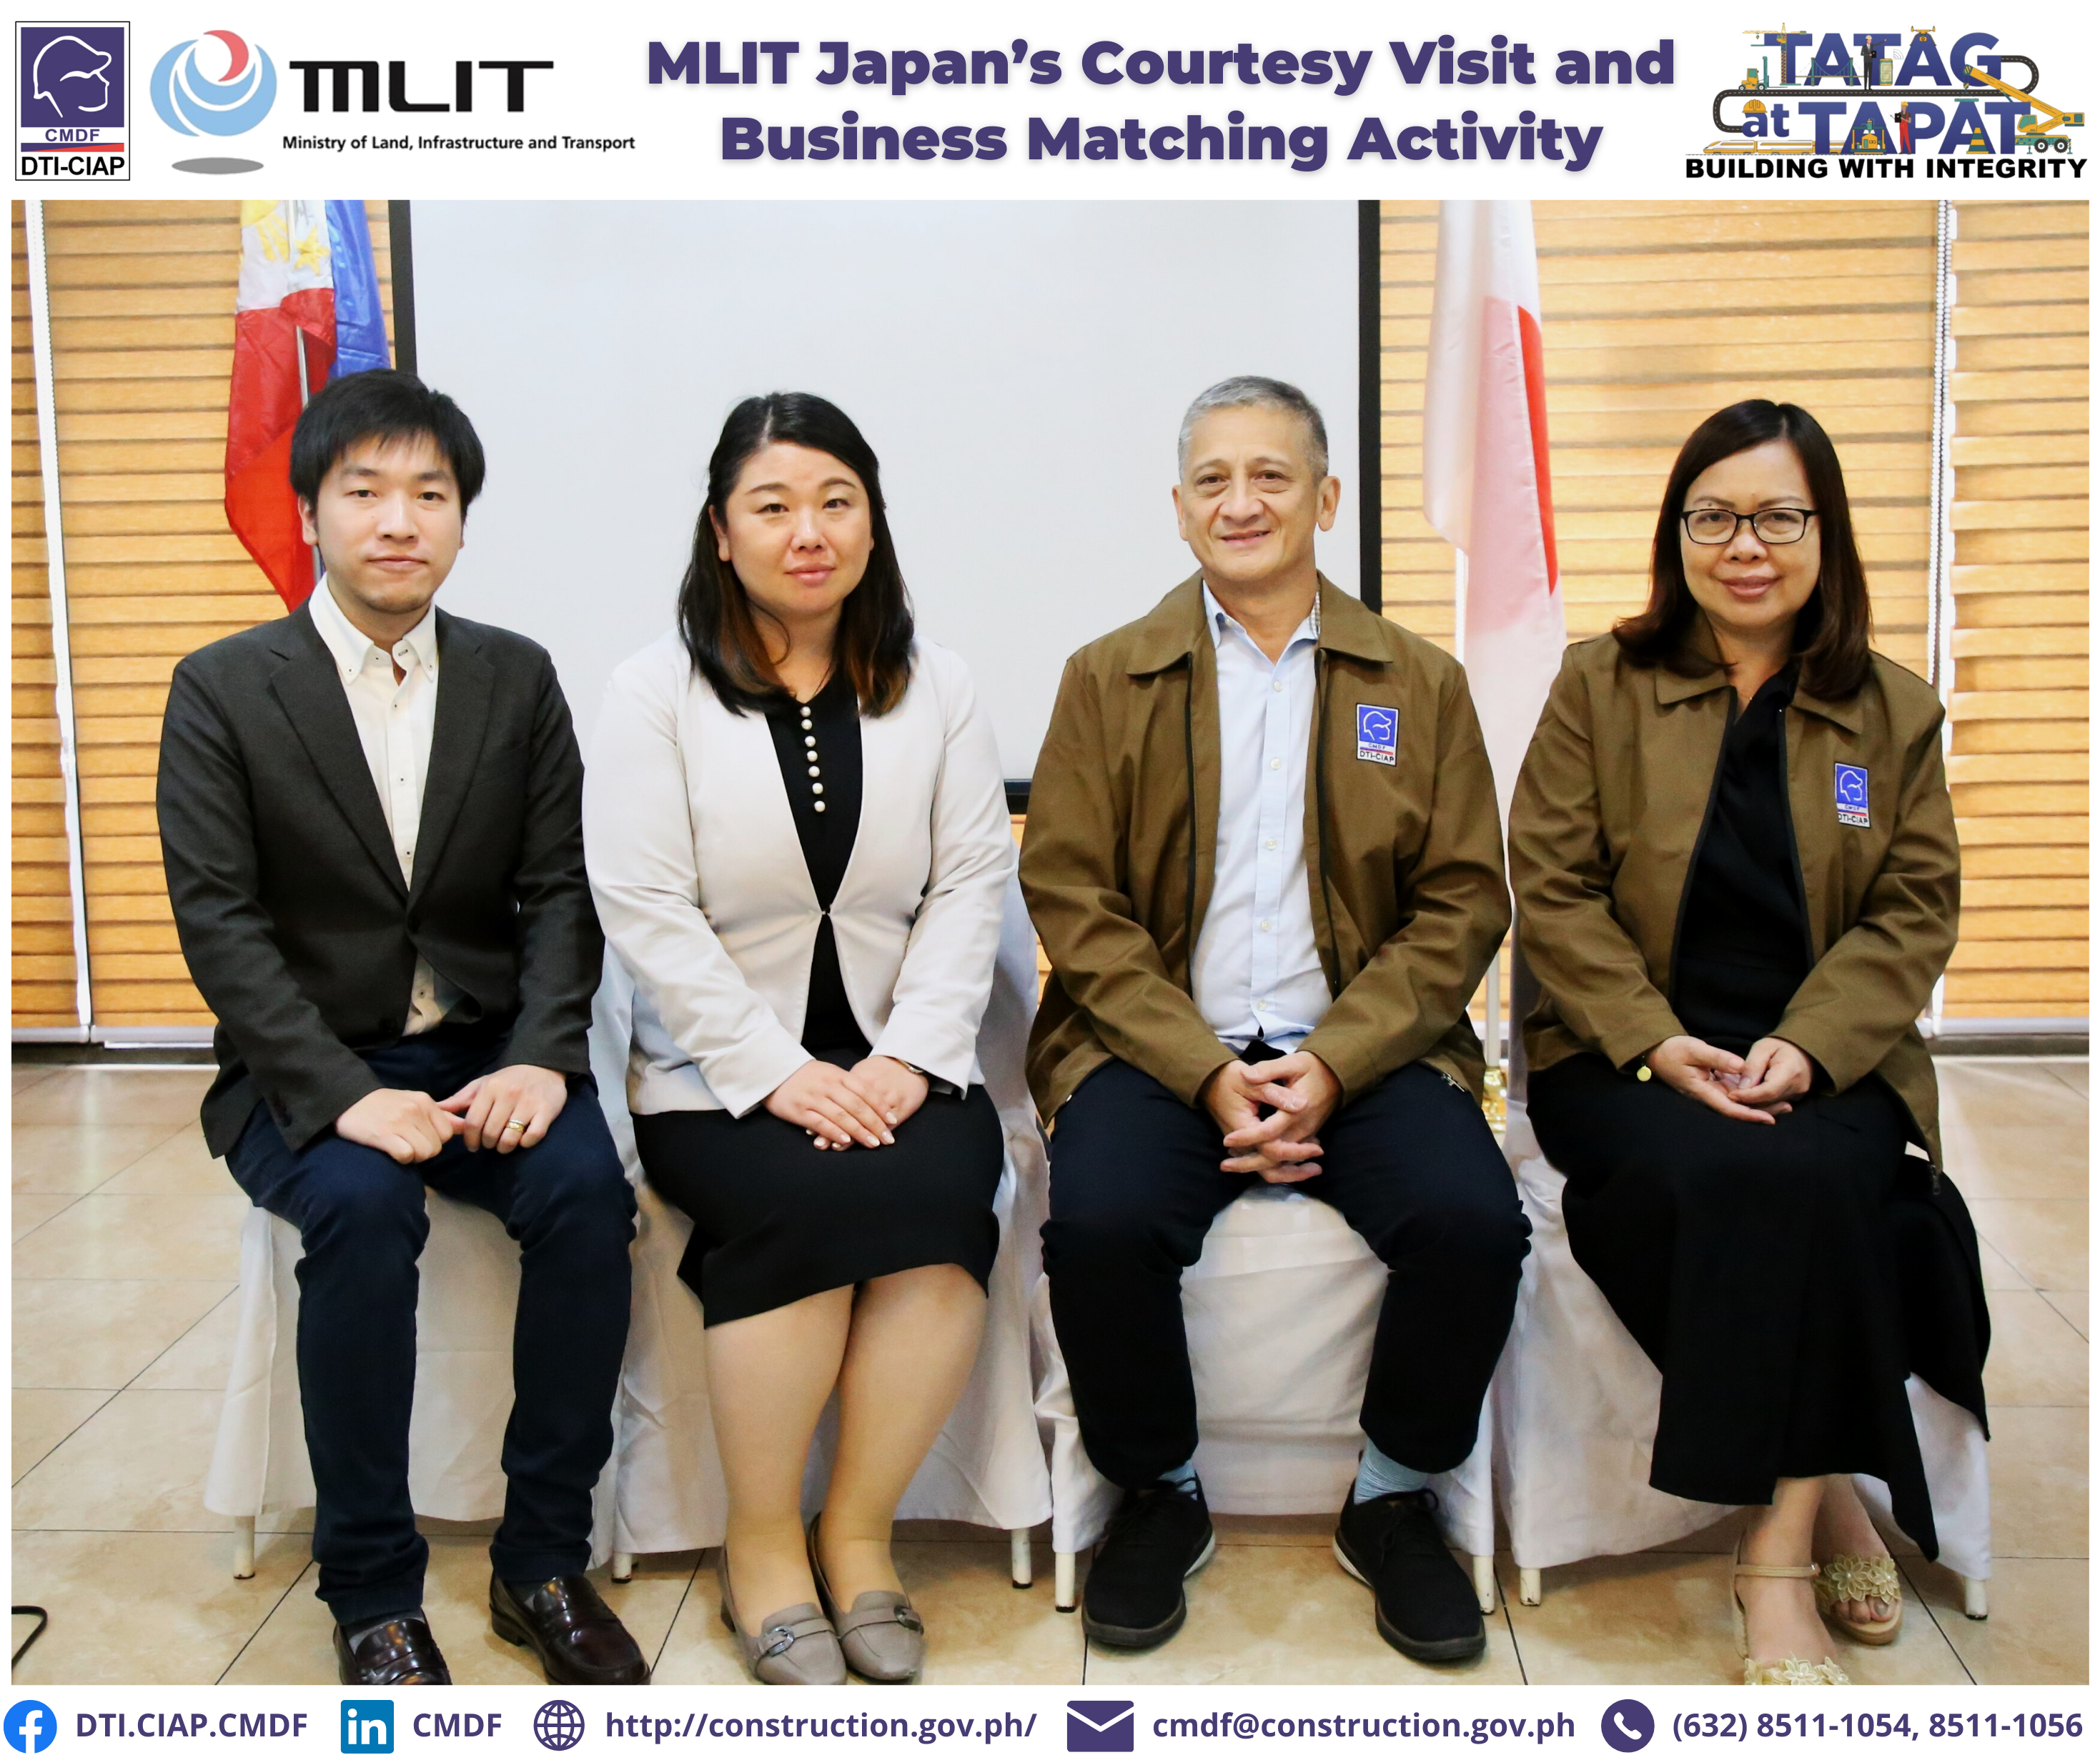 MLIT Japan’s Courtesy Visit and Business Matching Activity